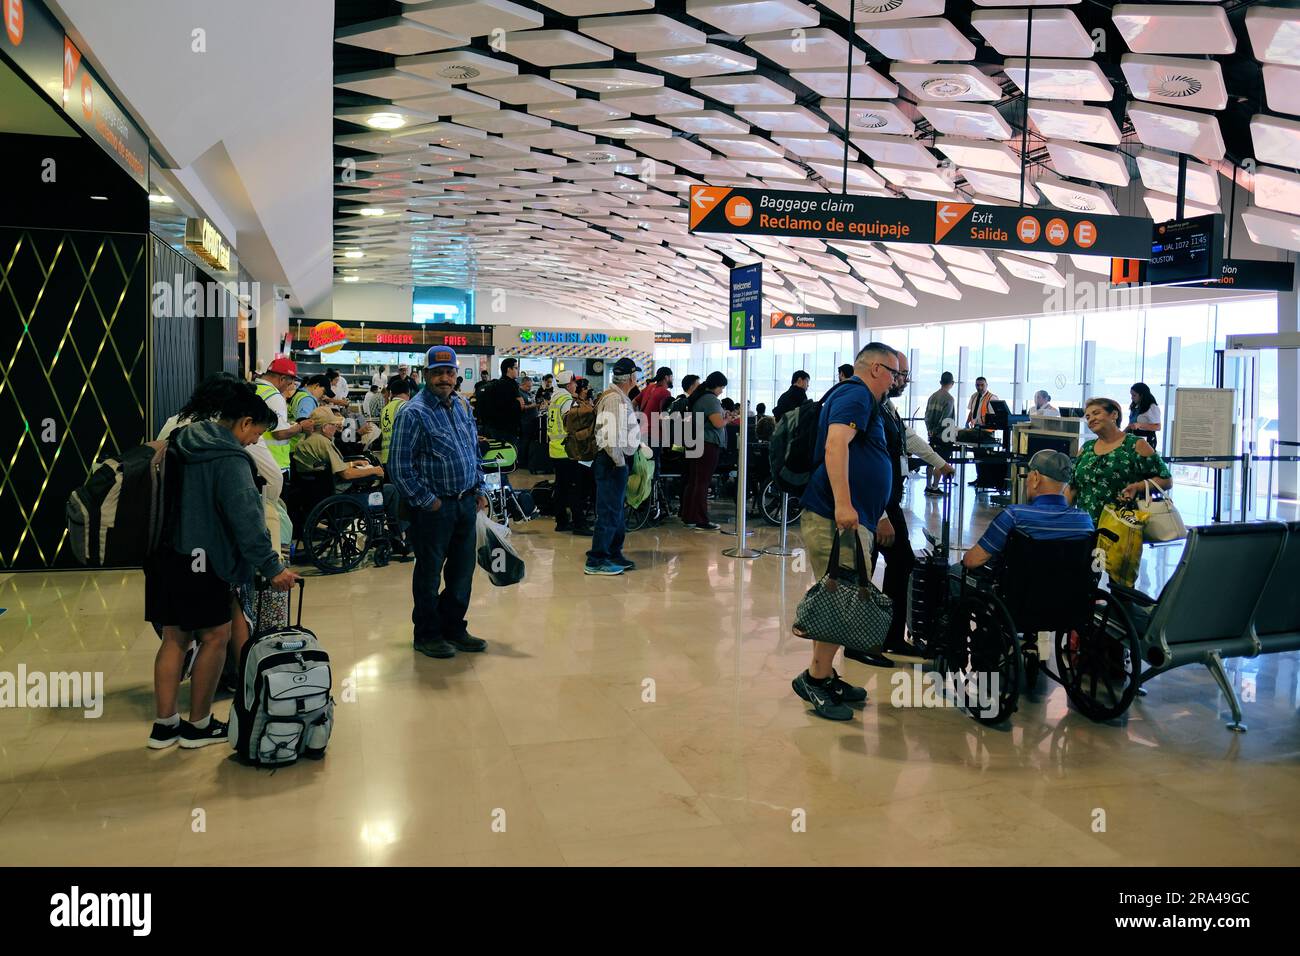 Passengers waiting to board a flight at Bajio International Airport in Silao, Guanajuato; travelers with luggage at boarding gate; wheel chair Stock Photo